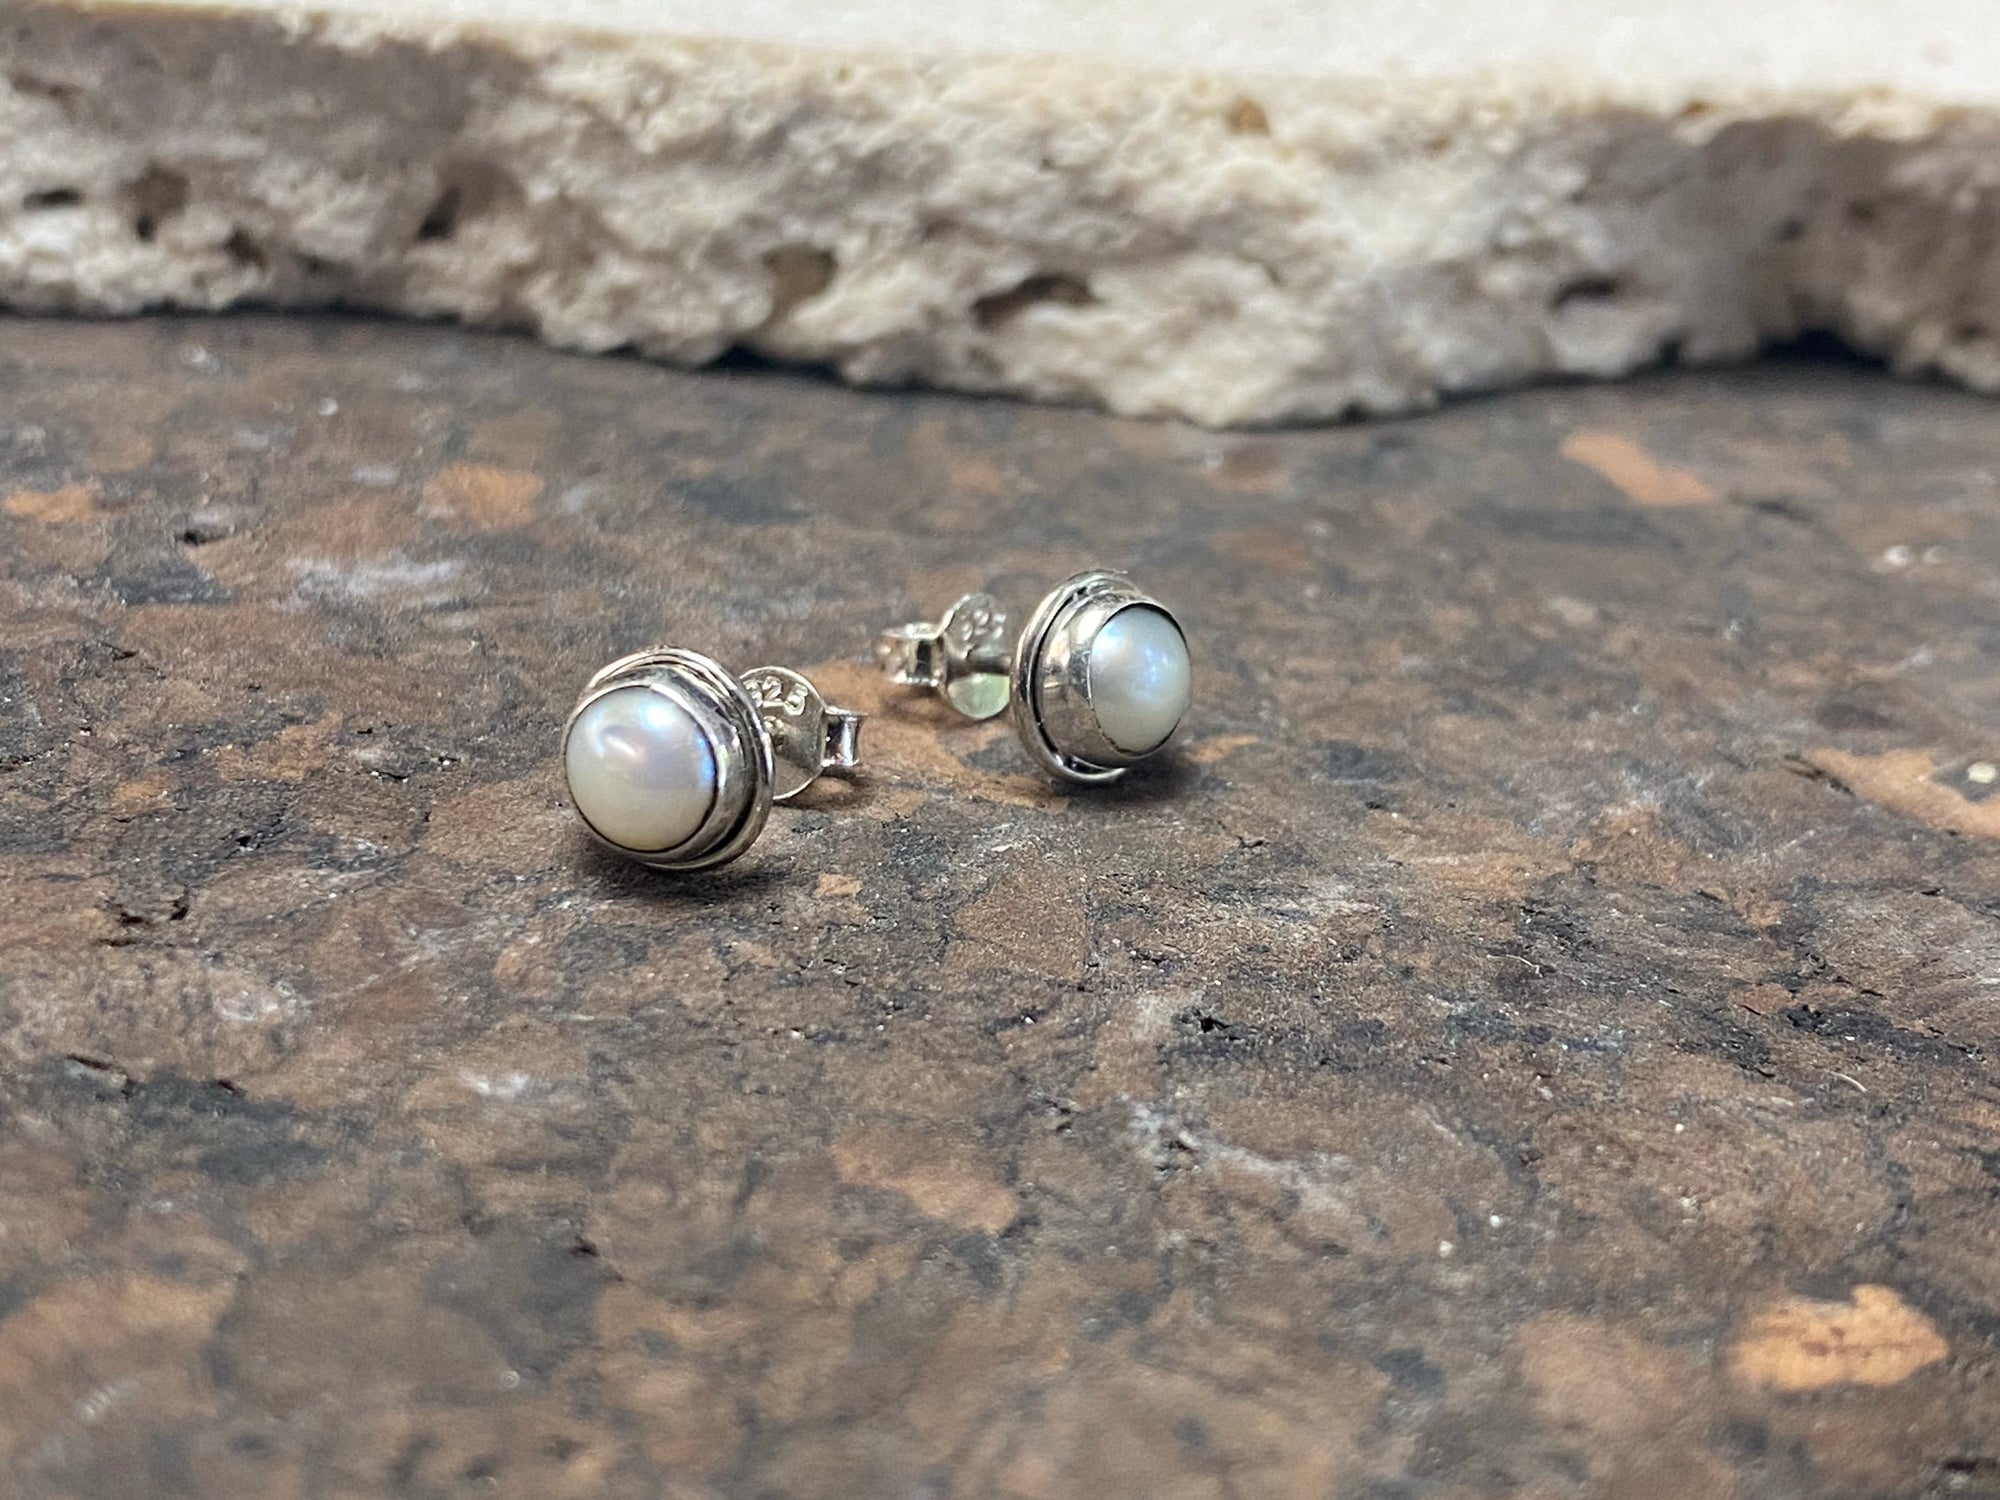 These small pearl studs are hand made from sterling silver and set with natural pearl cabochon stones